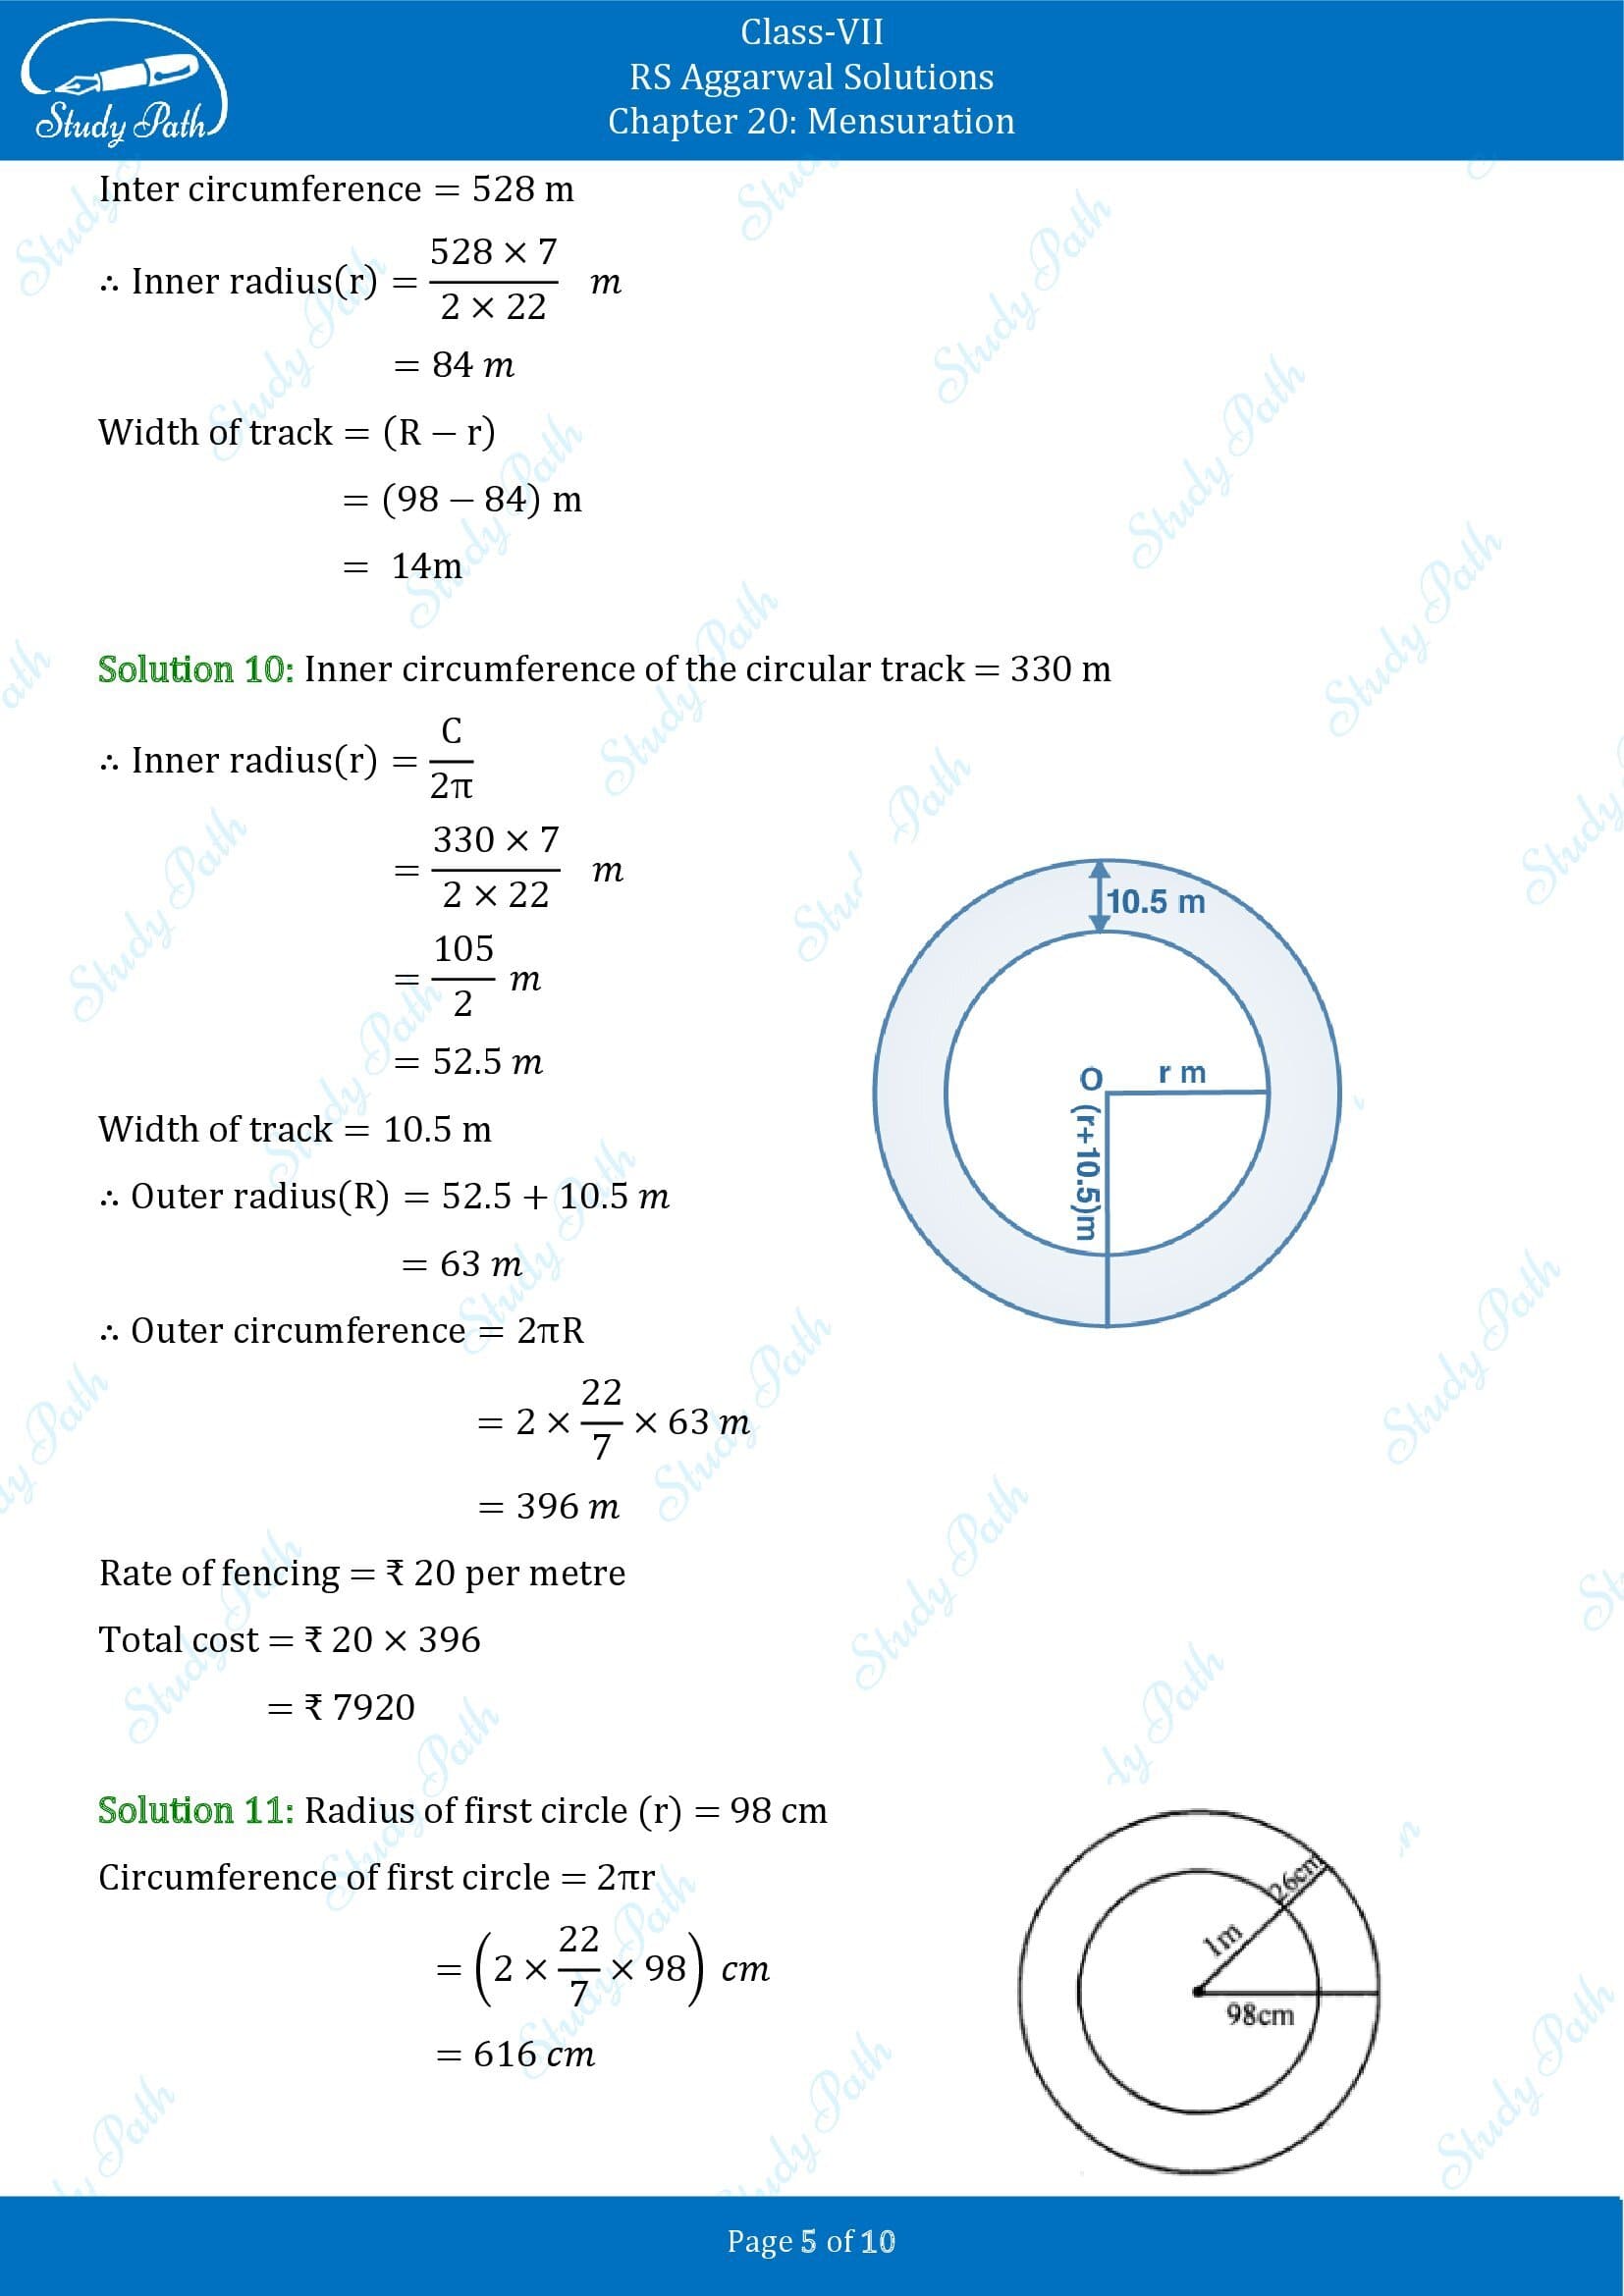 RS Aggarwal Solutions Class 7 Chapter 20 Mensuration Exercise 20E 00005